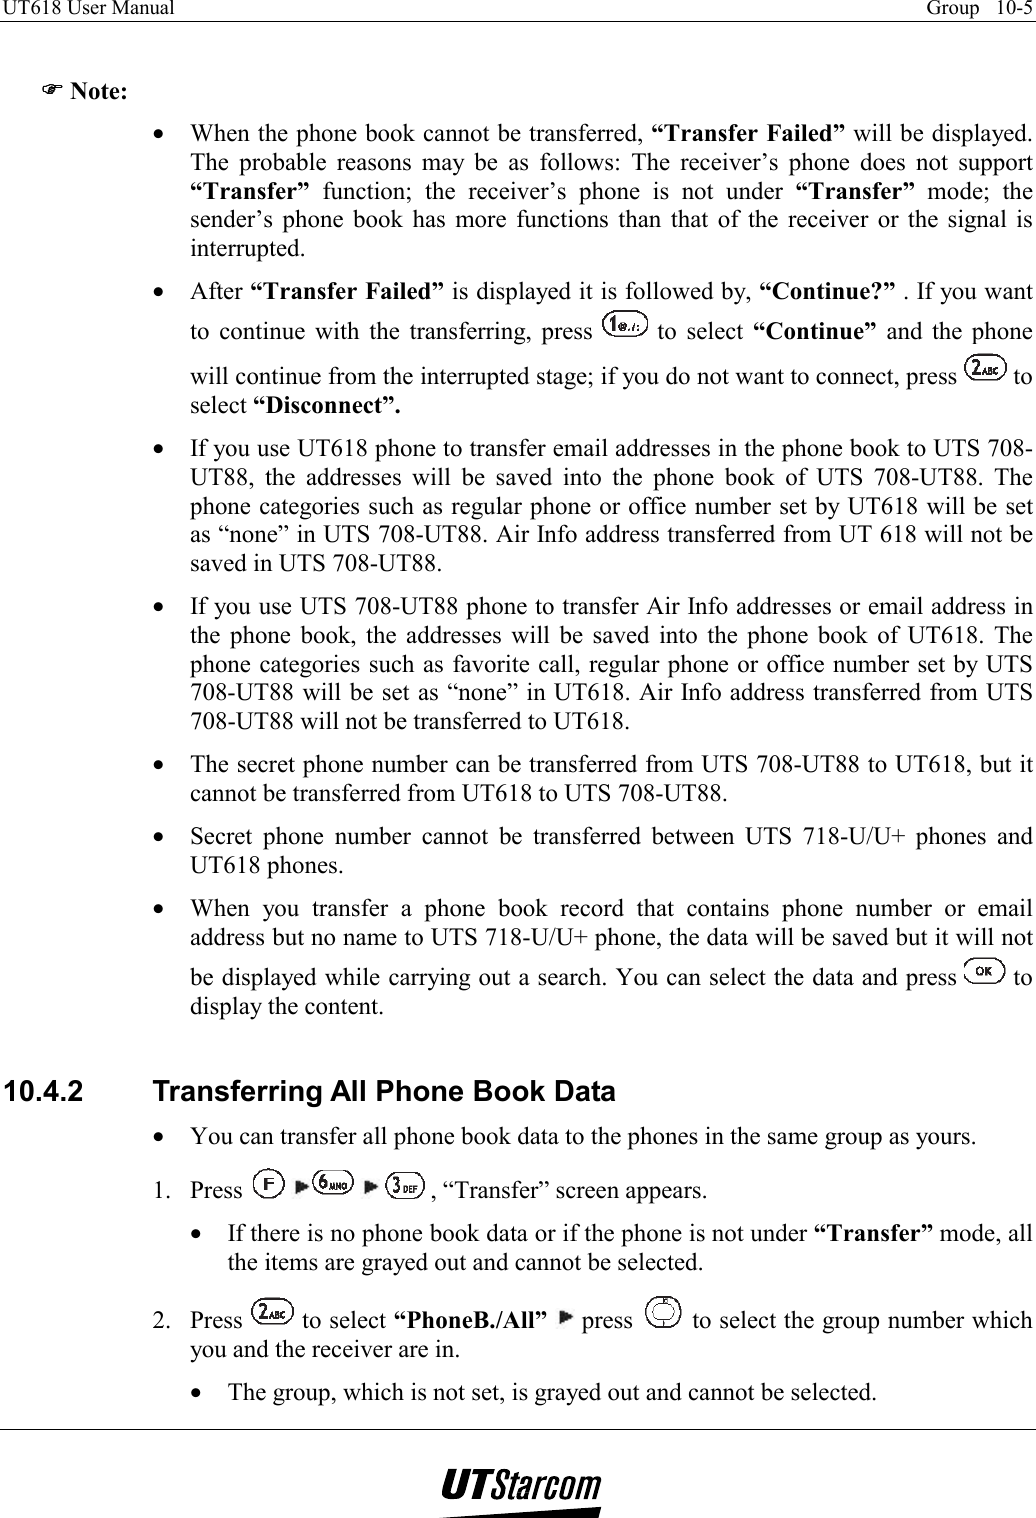 UT618 User Manual    Group   10-5    )))) Note: •  When the phone book cannot be transferred, “Transfer Failed” will be displayed. The probable reasons may be as follows: The receiver’s phone does not support “Transfer”  function; the receiver’s phone is not under “Transfer” mode; the sender’s phone book has more functions than that of the receiver or the signal is interrupted. •  After “Transfer Failed” is displayed it is followed by, “Continue?” . If you want to continue with the transferring, press   to select “Continue” and the phone will continue from the interrupted stage; if you do not want to connect, press   to select “Disconnect”. •  If you use UT618 phone to transfer email addresses in the phone book to UTS 708-UT88, the addresses will be saved into the phone book of UTS 708-UT88. The phone categories such as regular phone or office number set by UT618 will be set as “none” in UTS 708-UT88. Air Info address transferred from UT 618 will not be saved in UTS 708-UT88. •  If you use UTS 708-UT88 phone to transfer Air Info addresses or email address in the phone book, the addresses will be saved into the phone book of UT618. The phone categories such as favorite call, regular phone or office number set by UTS 708-UT88 will be set as “none” in UT618. Air Info address transferred from UTS 708-UT88 will not be transferred to UT618. •  The secret phone number can be transferred from UTS 708-UT88 to UT618, but it cannot be transferred from UT618 to UTS 708-UT88. •  Secret phone number cannot be transferred between UTS 718-U/U+ phones and UT618 phones. •  When you transfer a phone book record that contains phone number or email address but no name to UTS 718-U/U+ phone, the data will be saved but it will not be displayed while carrying out a search. You can select the data and press   to display the content.  10.4.2  Transferring All Phone Book Data •  You can transfer all phone book data to the phones in the same group as yours. 1. Press        , “Transfer” screen appears. •  If there is no phone book data or if the phone is not under “Transfer” mode, all the items are grayed out and cannot be selected. 2. Press   to select “PhoneB./All”  press   to select the group number which you and the receiver are in. •  The group, which is not set, is grayed out and cannot be selected. 